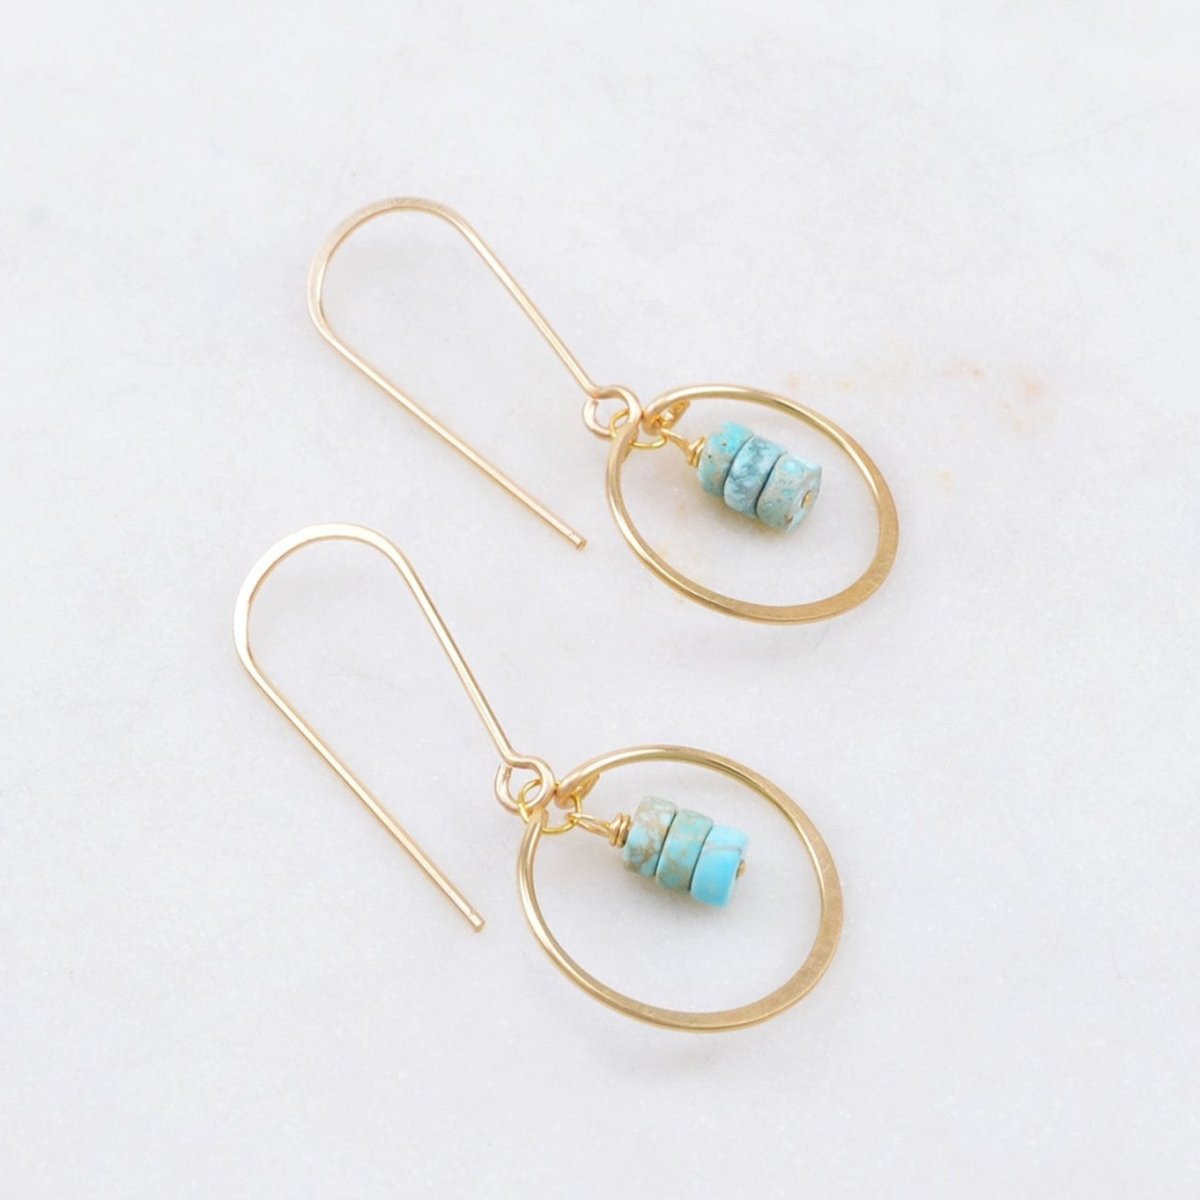 A curved gold-fill ear wire holds a hammered gold-fill circle. Three round turquoise beads hang from the center of the circle. The Petite Gem Drop Earrings in Turquoise are designed and handcrafted by Amy Olson in Portland, Oregon.